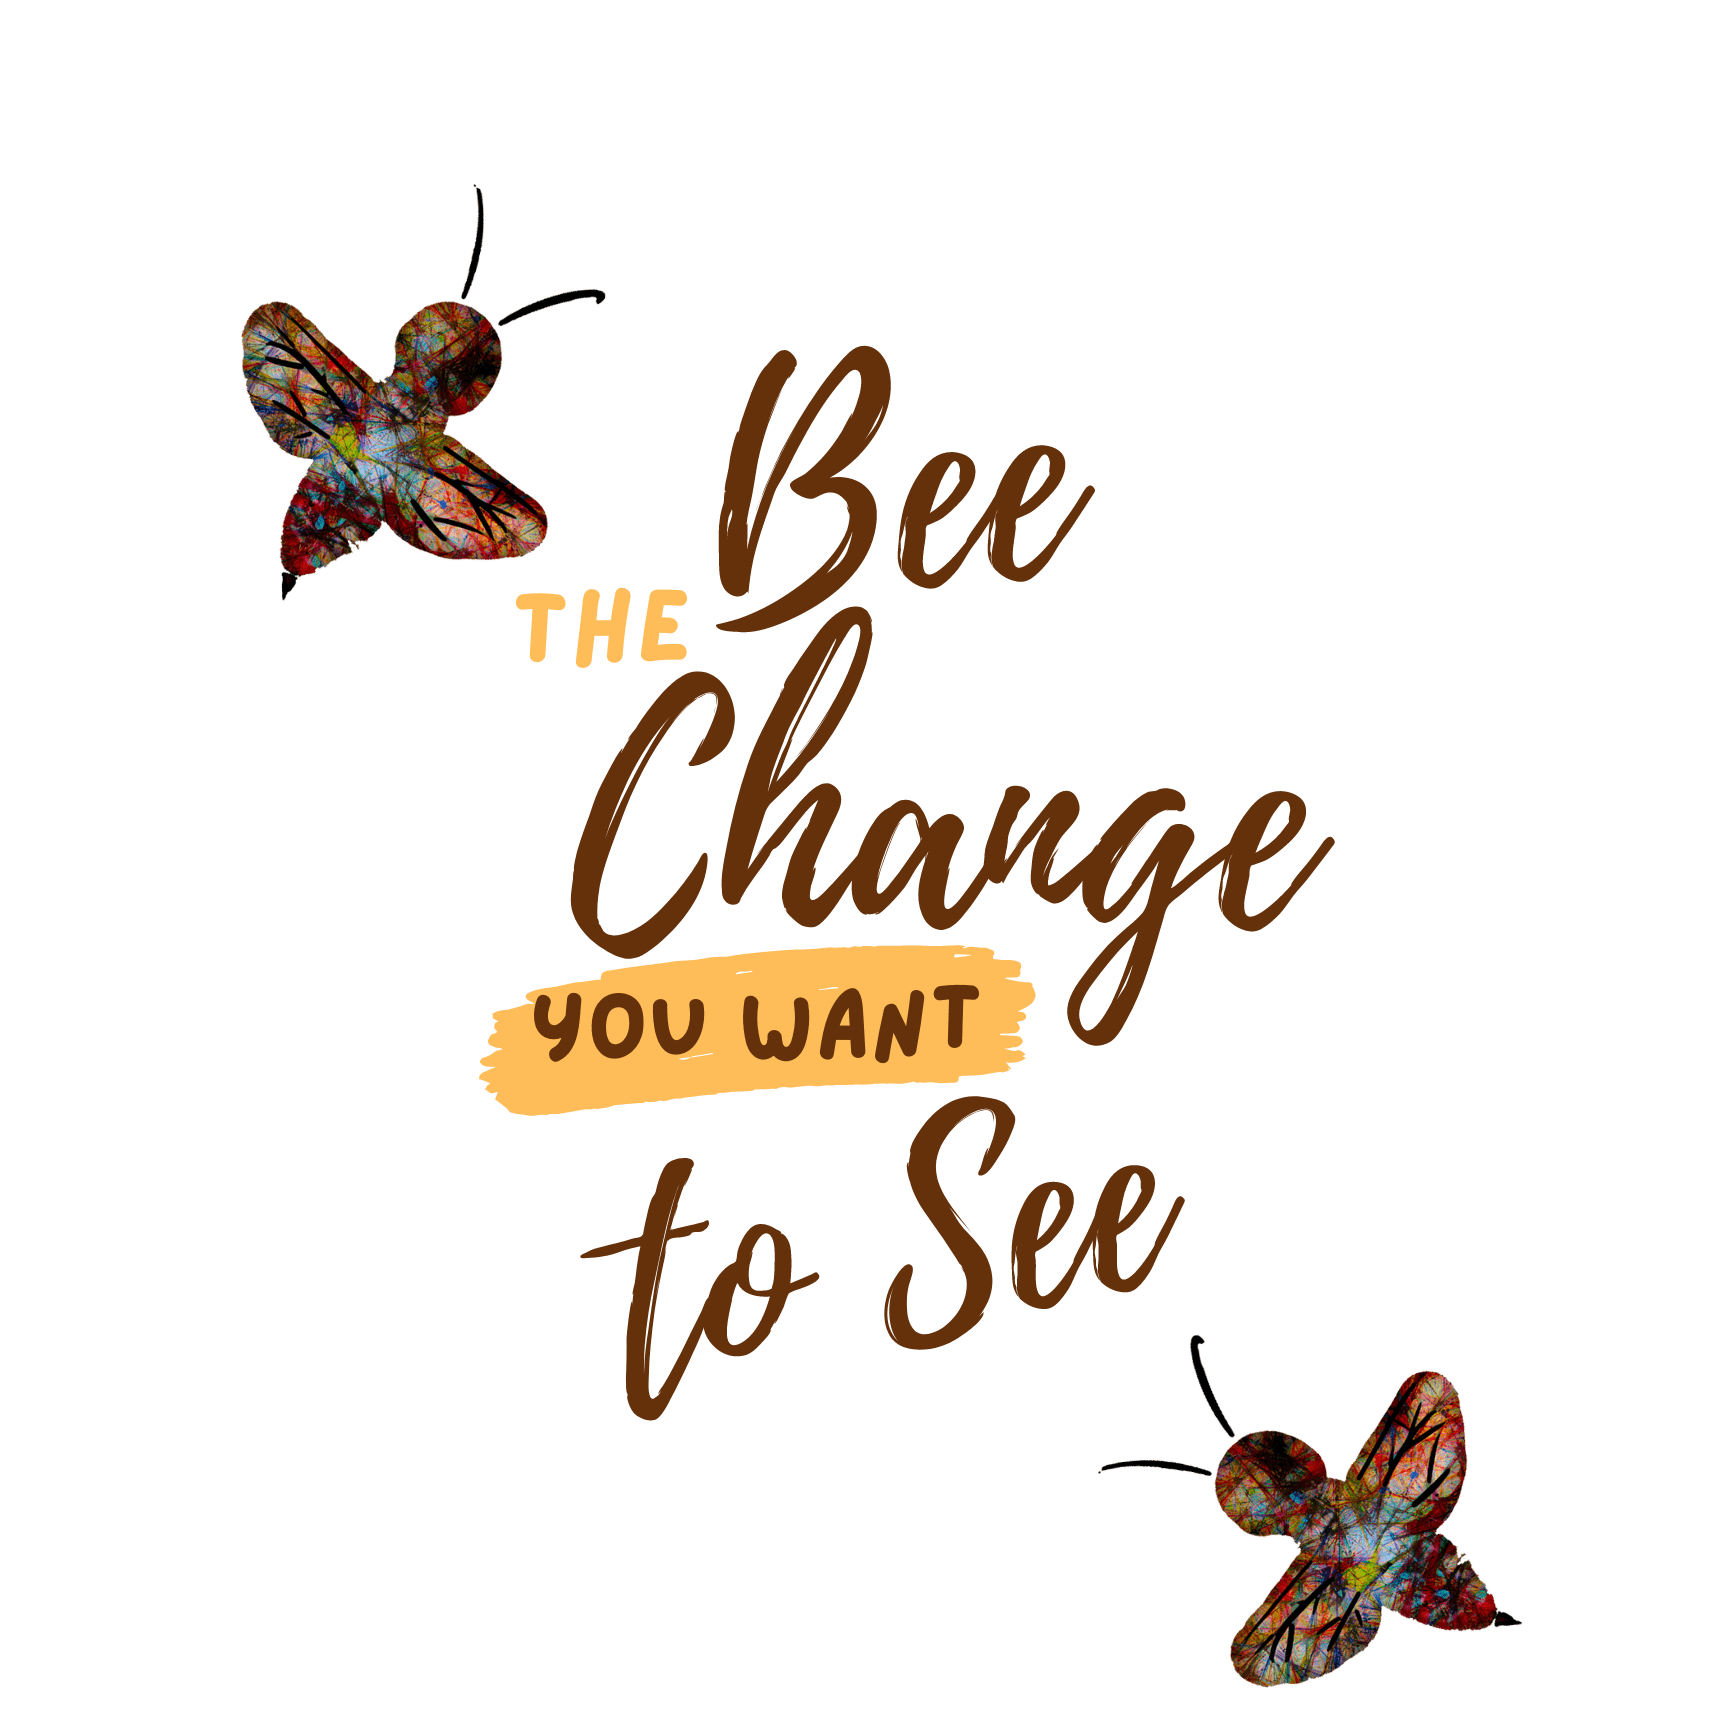 Bee the Change - That Bee Place